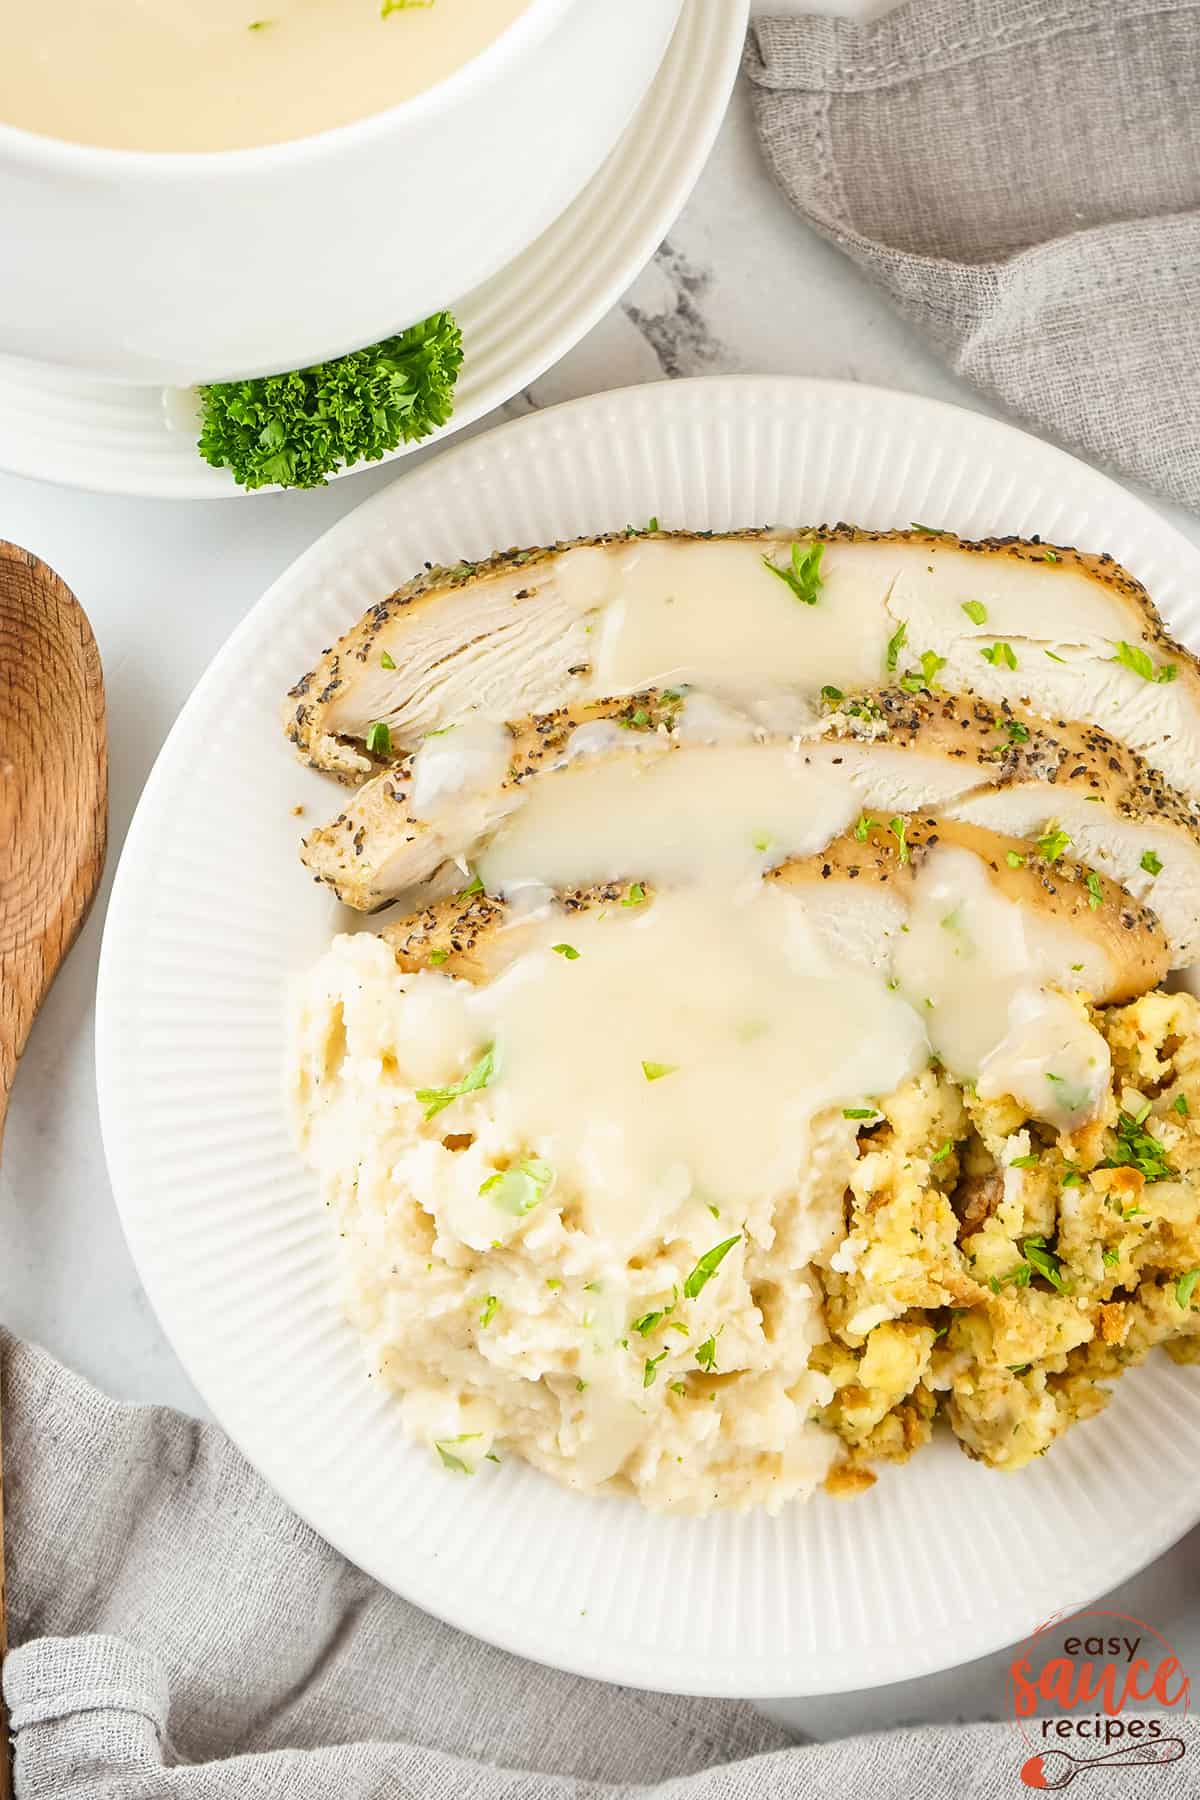 turkey gravy poured over slices of turkey breast on a plate with stuffing and potatoes